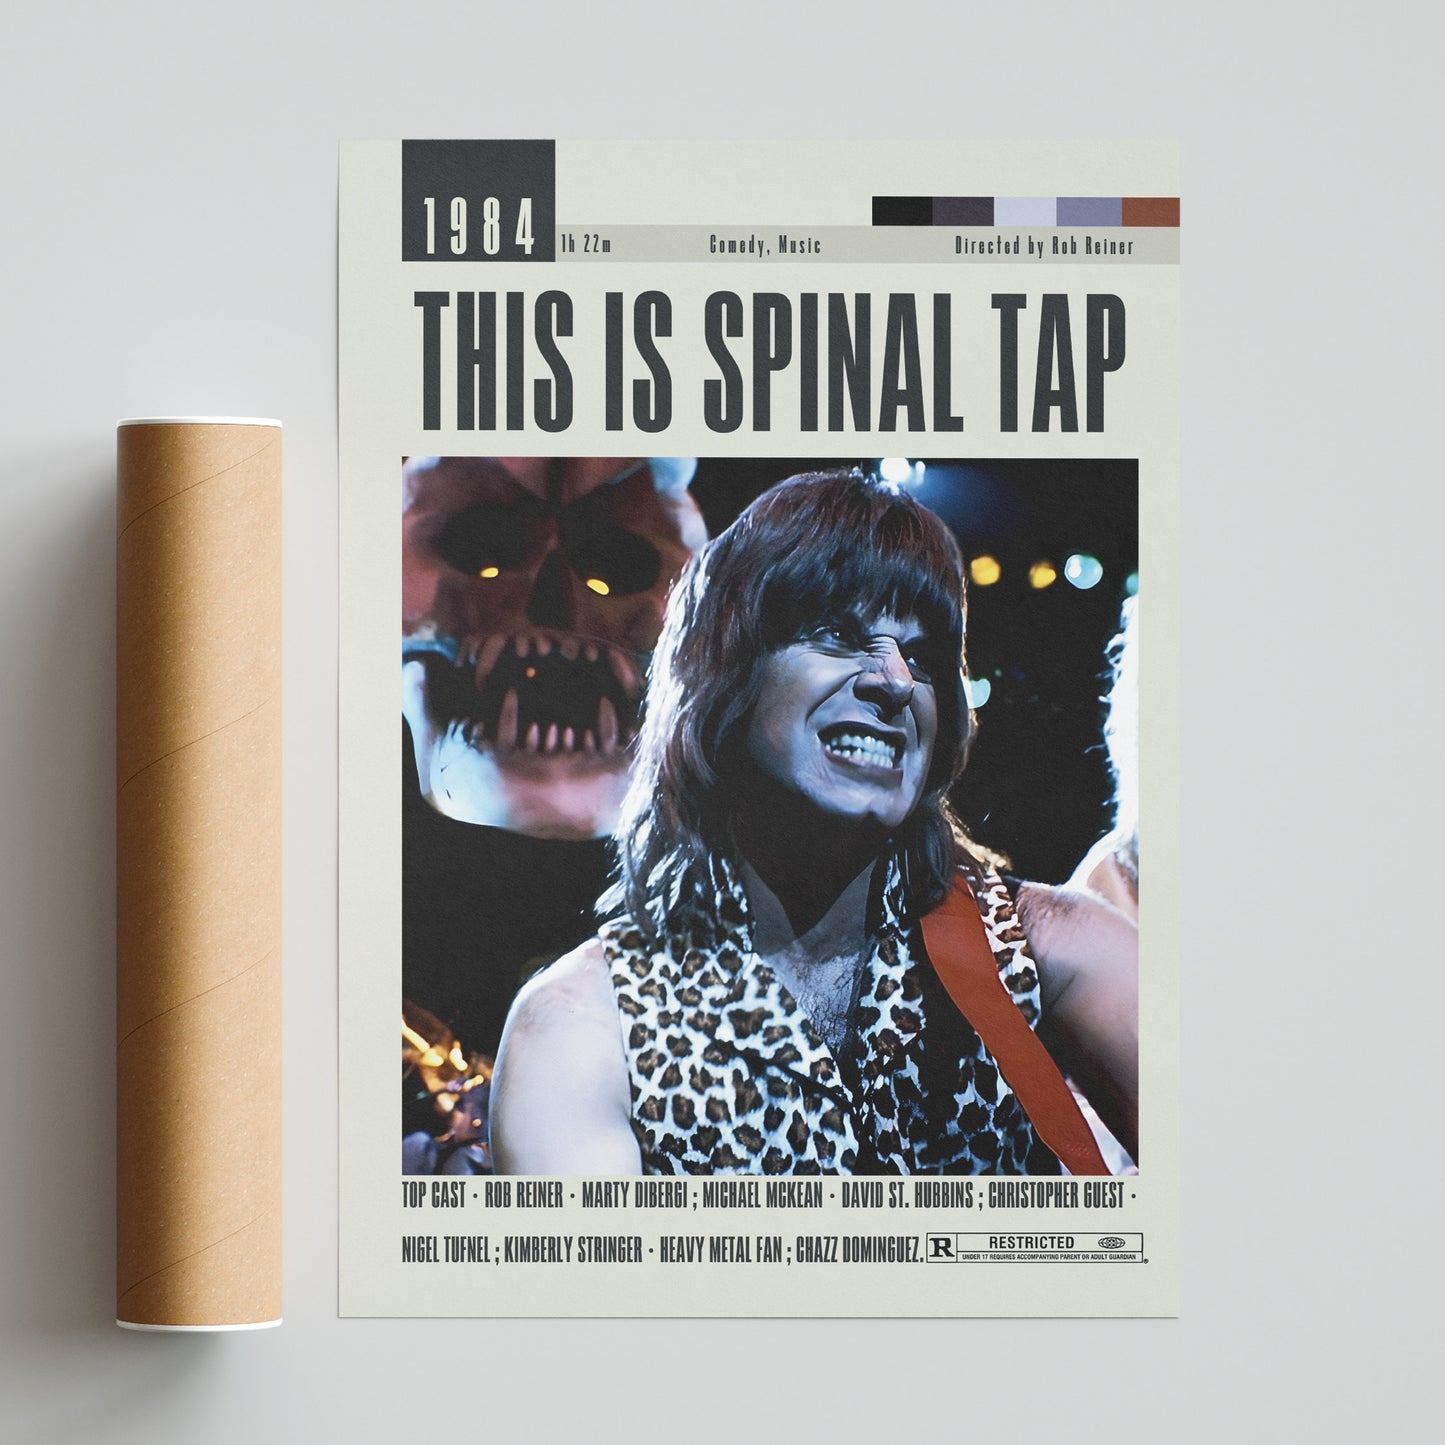 Enhance your movie collection with our original and cheap This is Spinal Tap poster. Available in large sizes, our vintage movie posters from the UK are framed for optimal presentation. Add a touch of minimalist and retro style to your walls with our custom wall art prints.